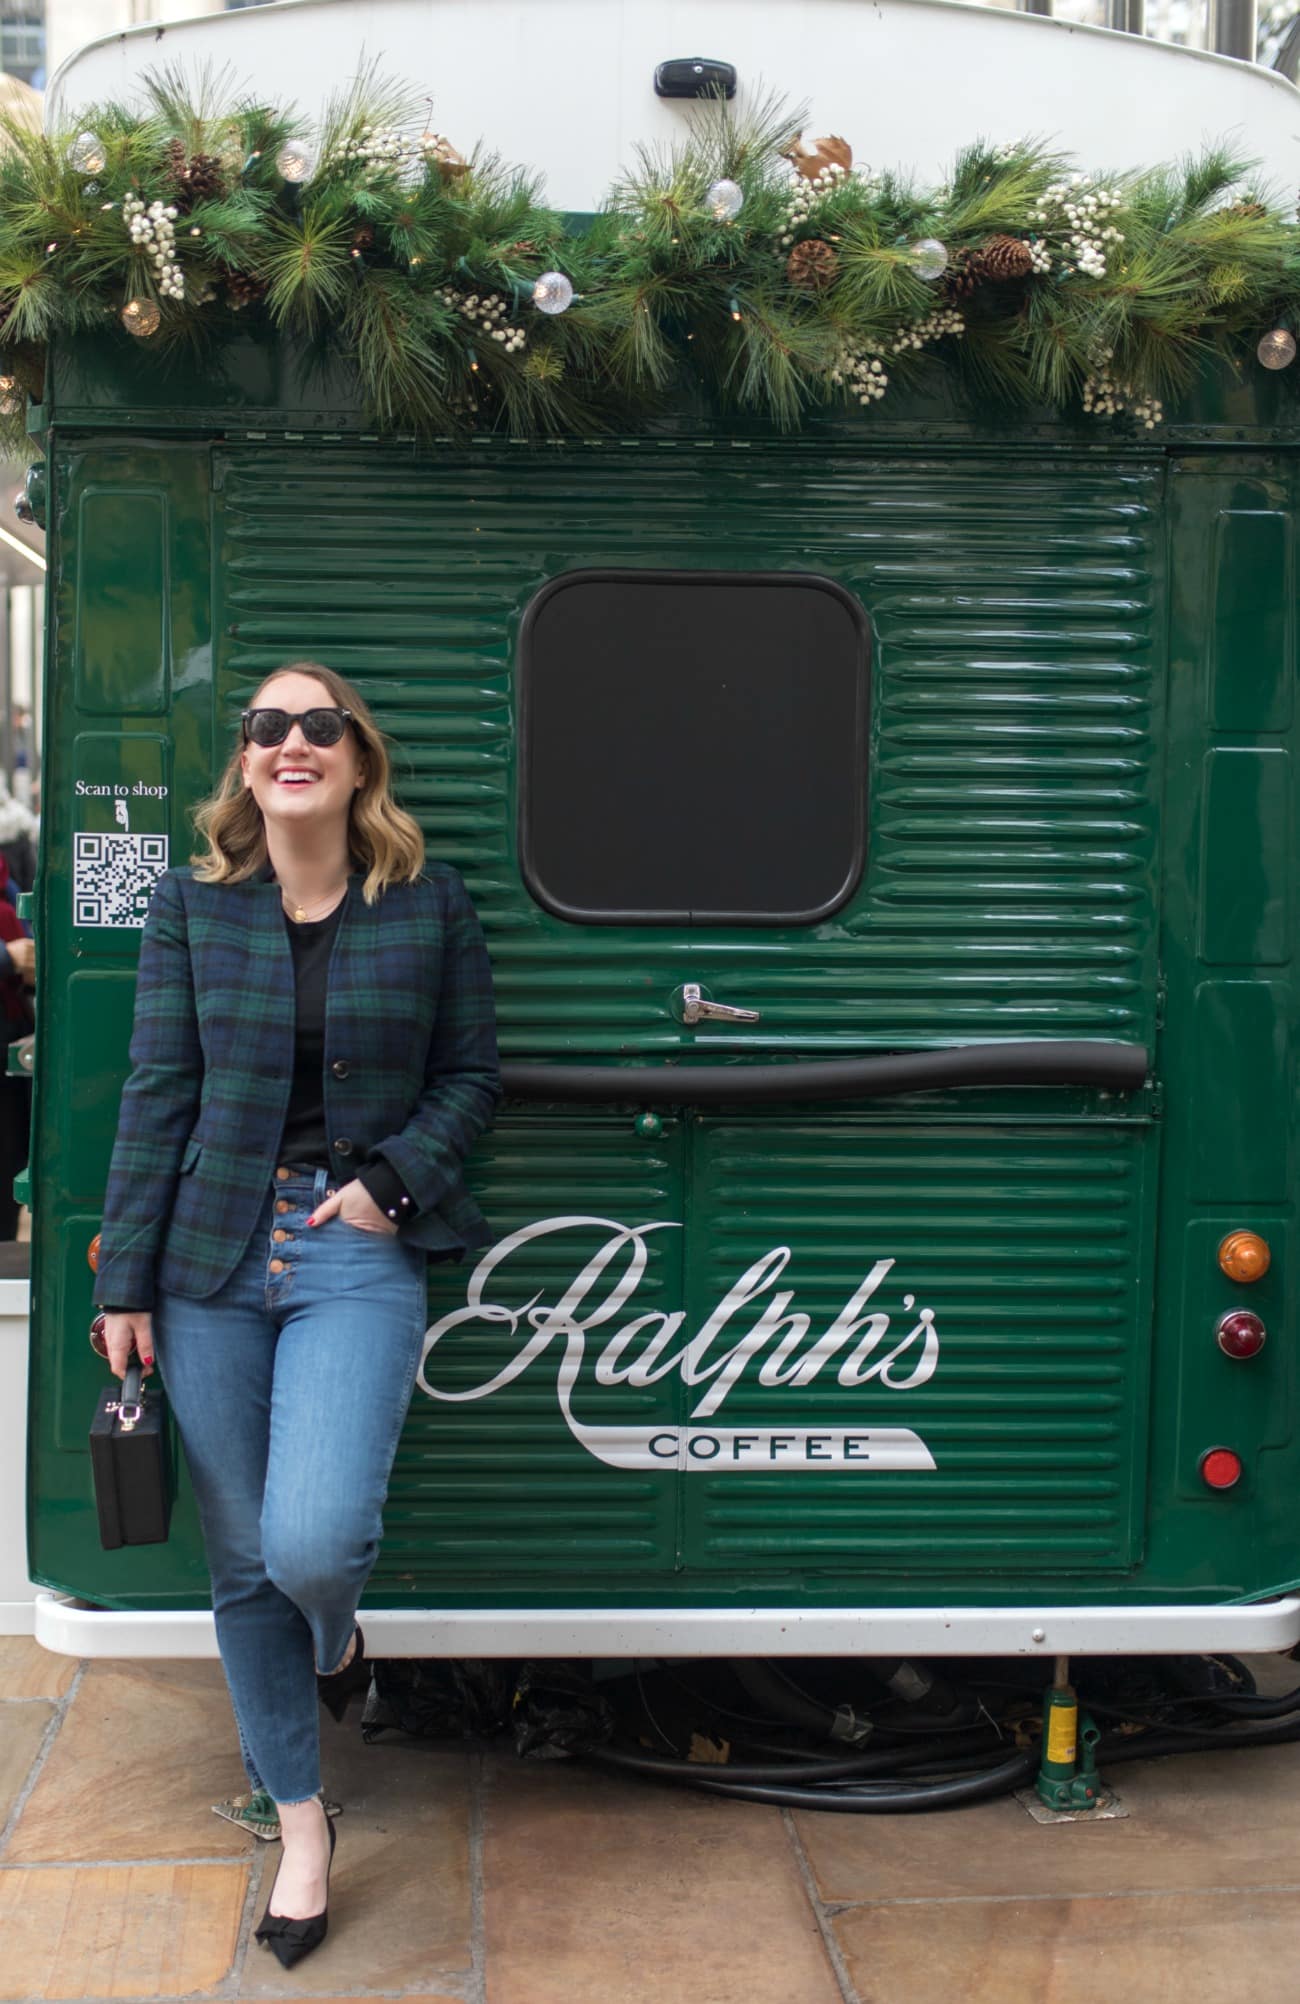 Ralph's Coffee Cart I wit & whimsy